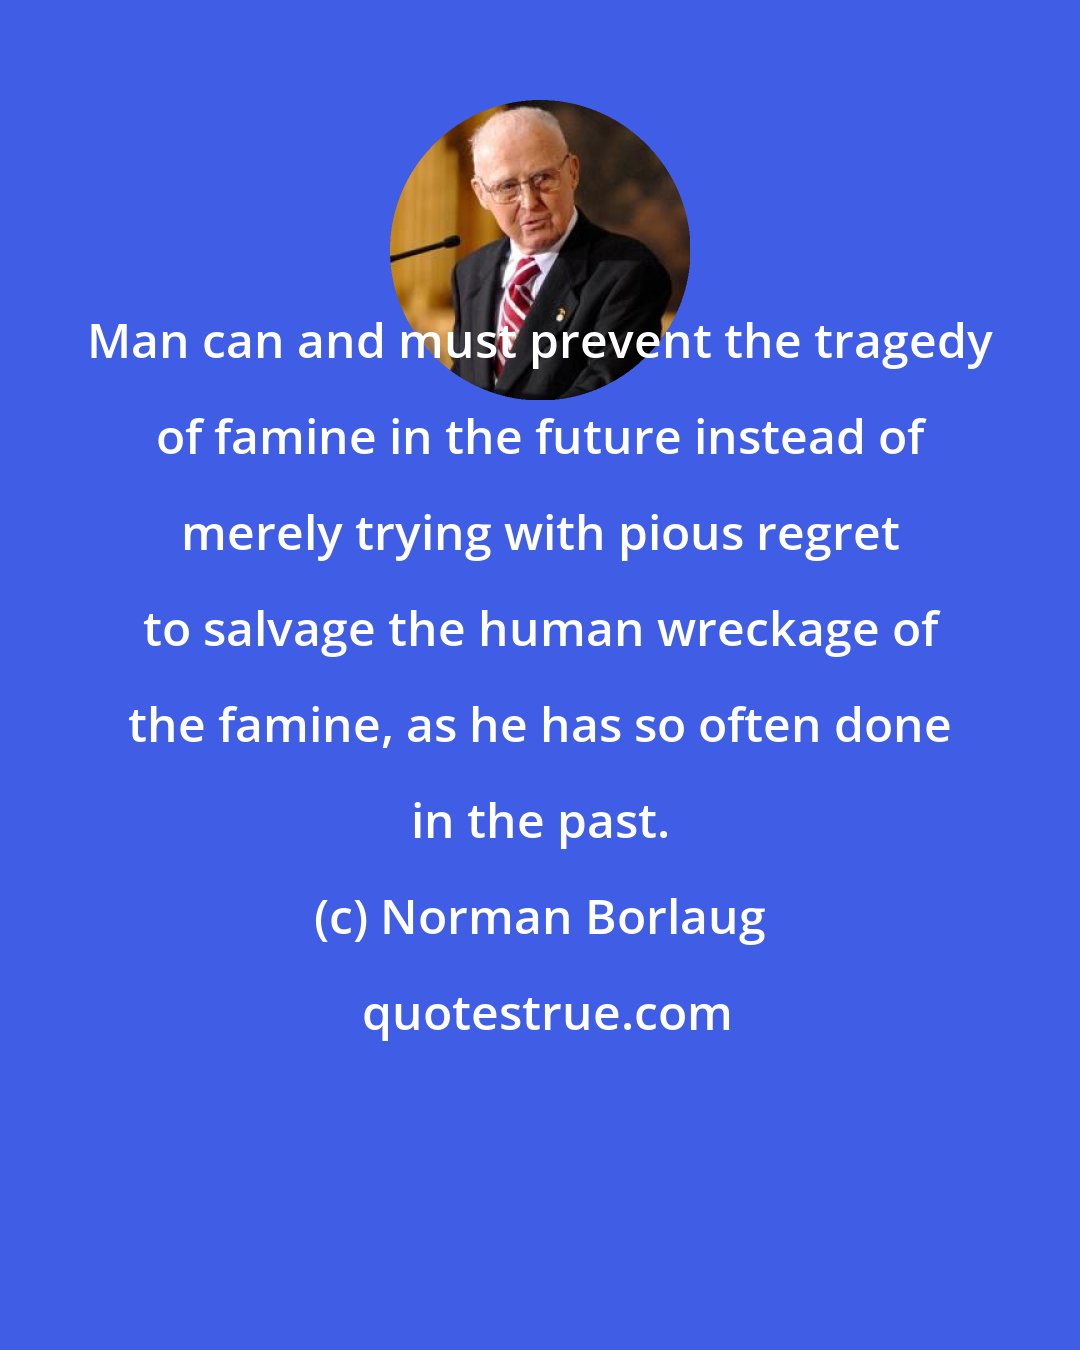 Norman Borlaug: Man can and must prevent the tragedy of famine in the future instead of merely trying with pious regret to salvage the human wreckage of the famine, as he has so often done in the past.